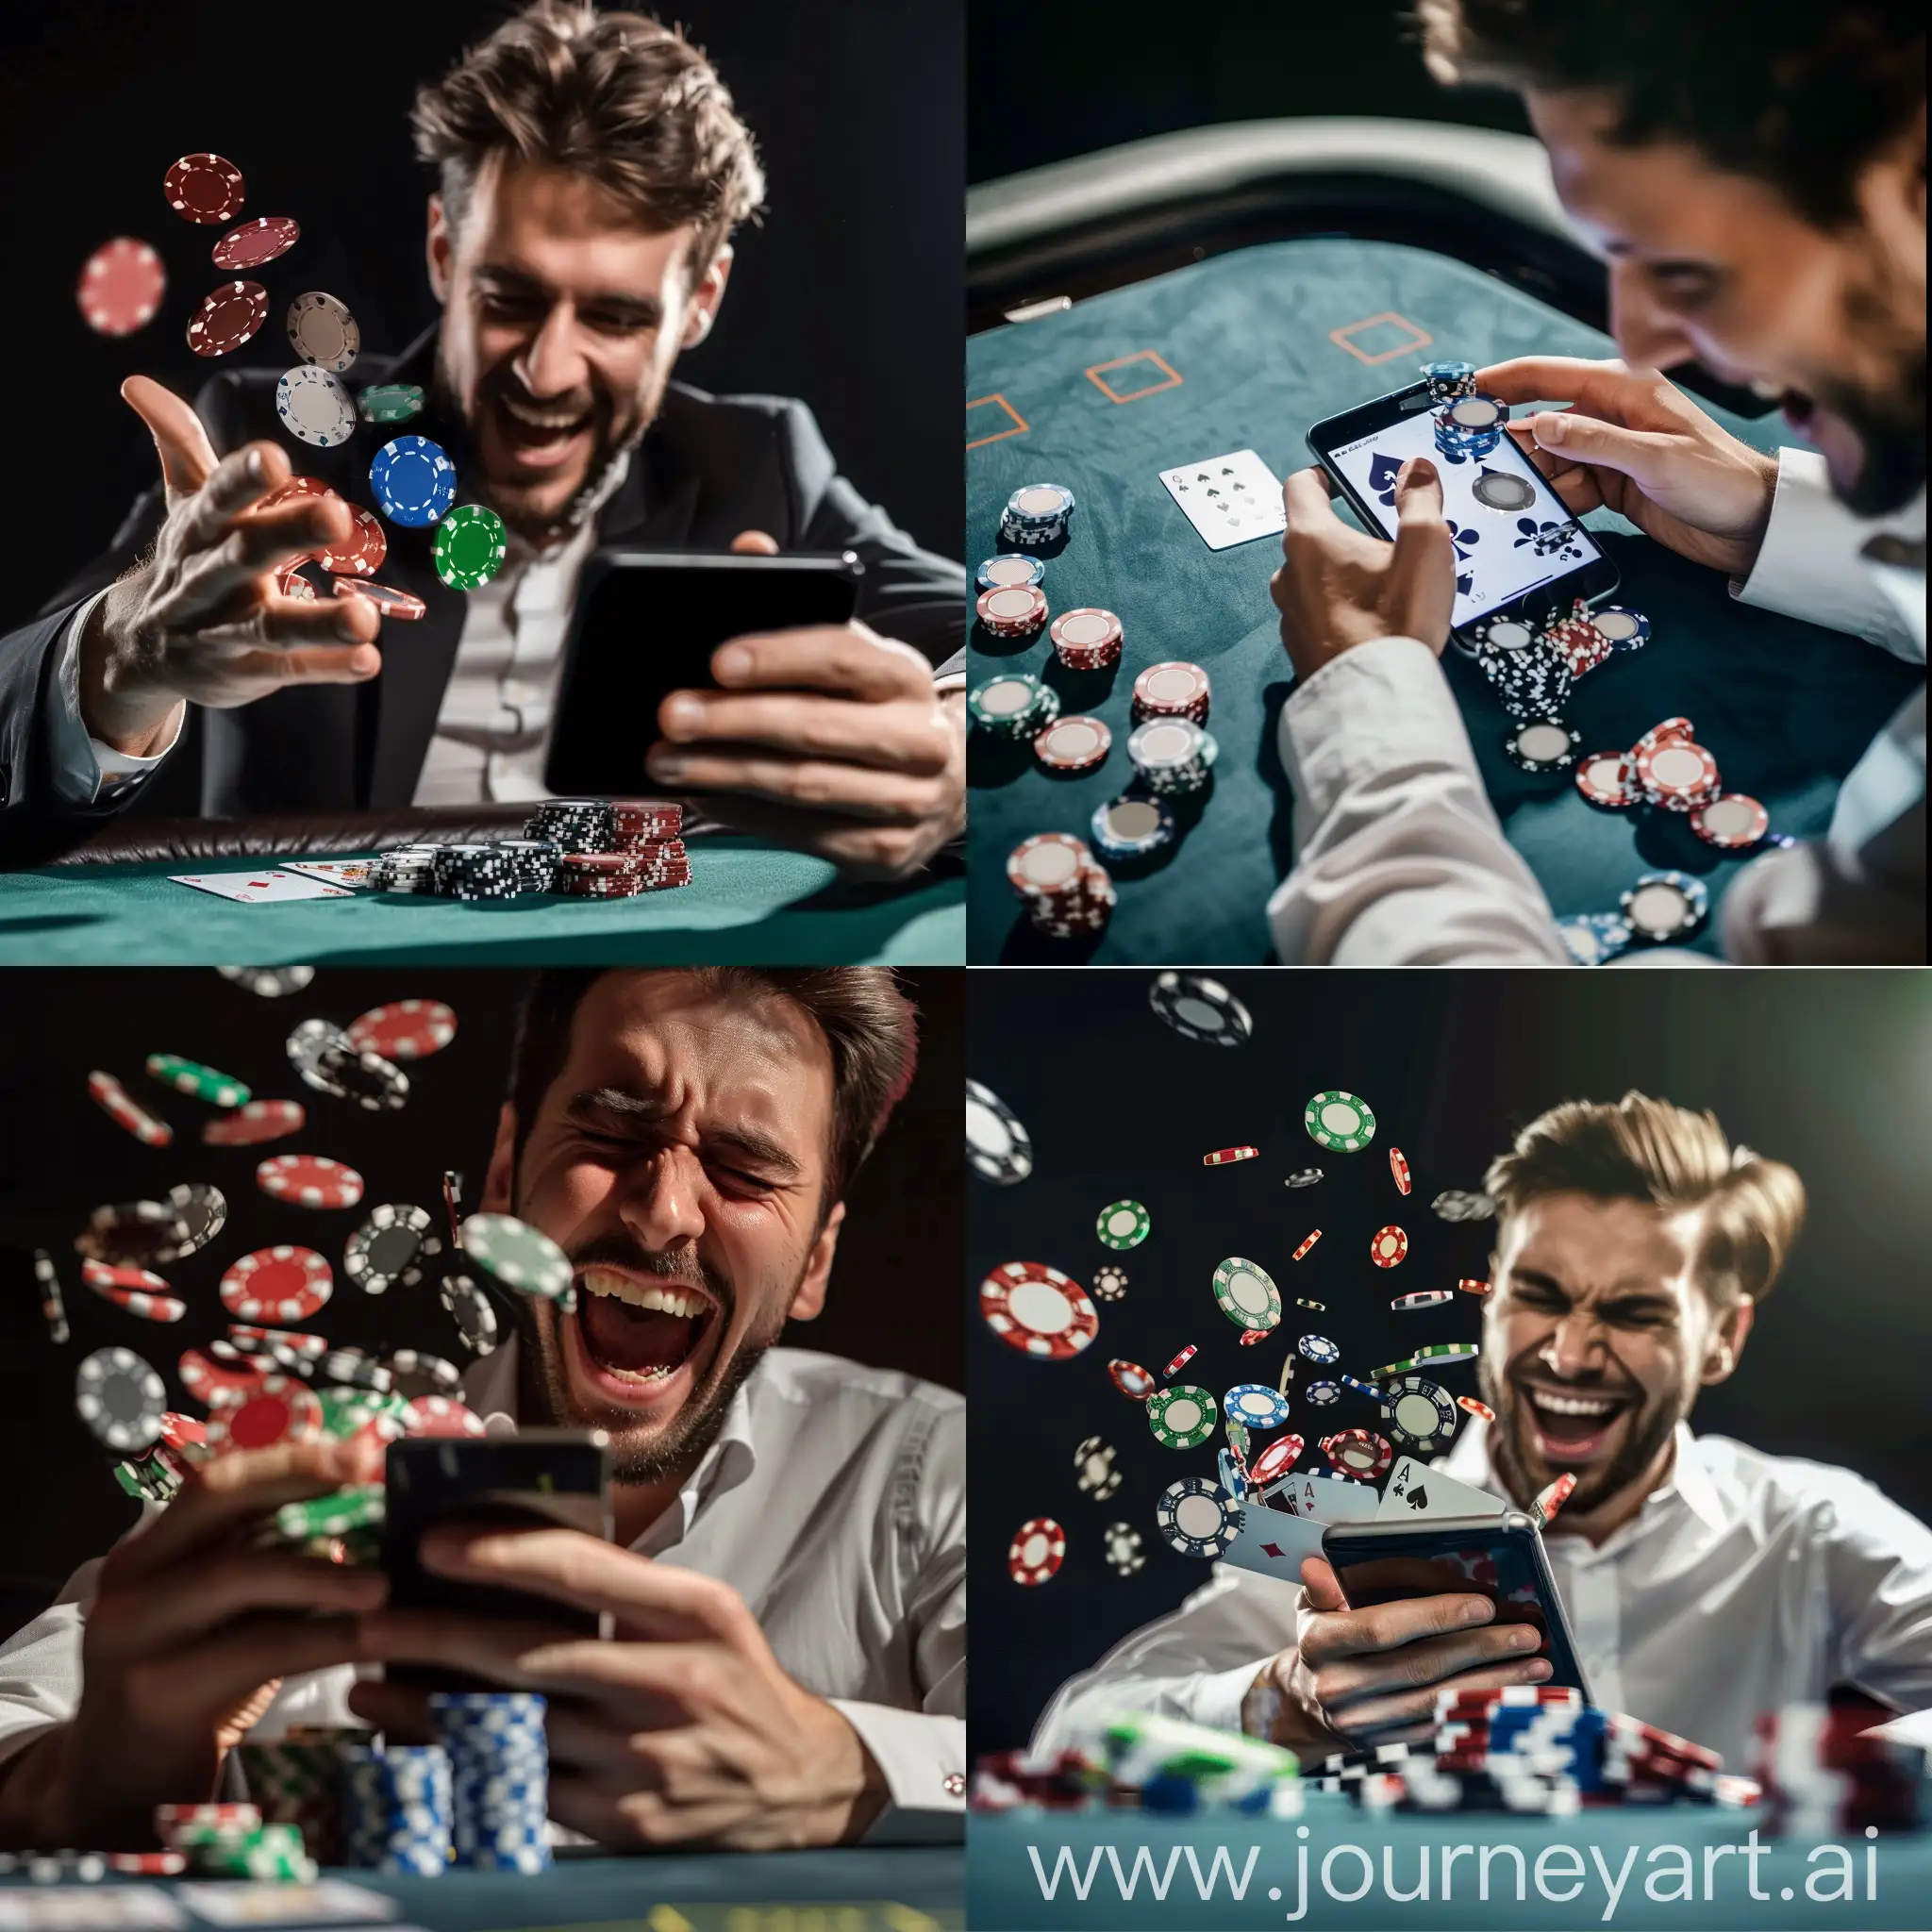 a formal man playing online poker and happy with visual and poker chips come out of phone